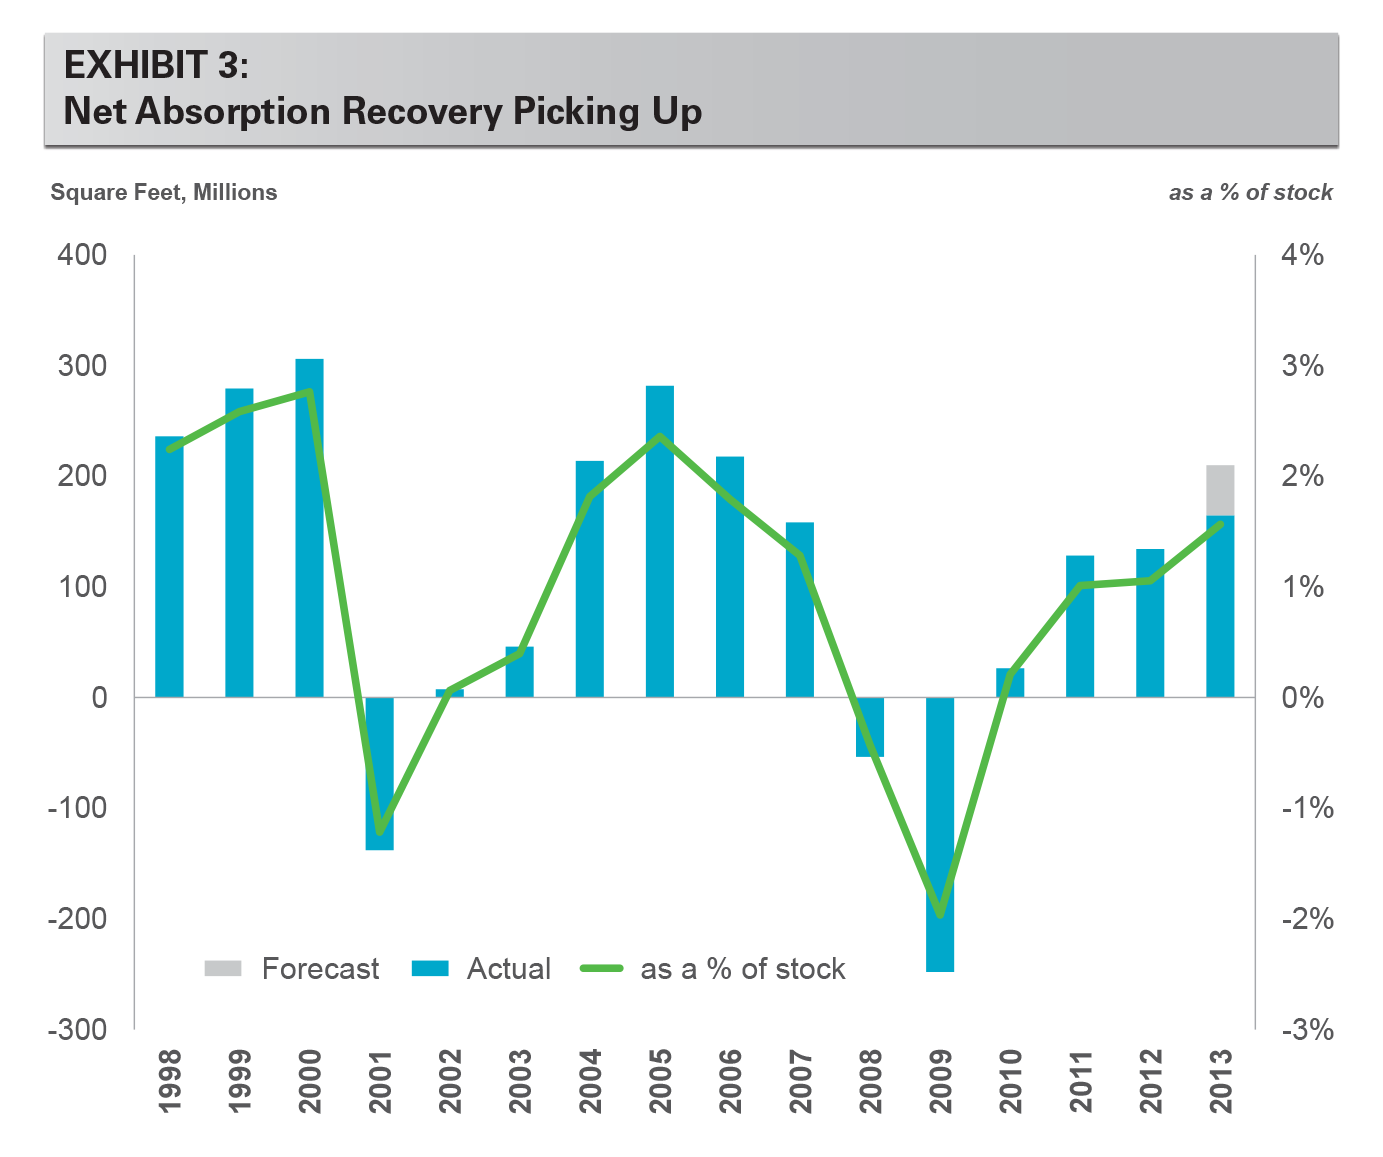 EXHIBIT 3: Net Absorption Recovery Picking Up